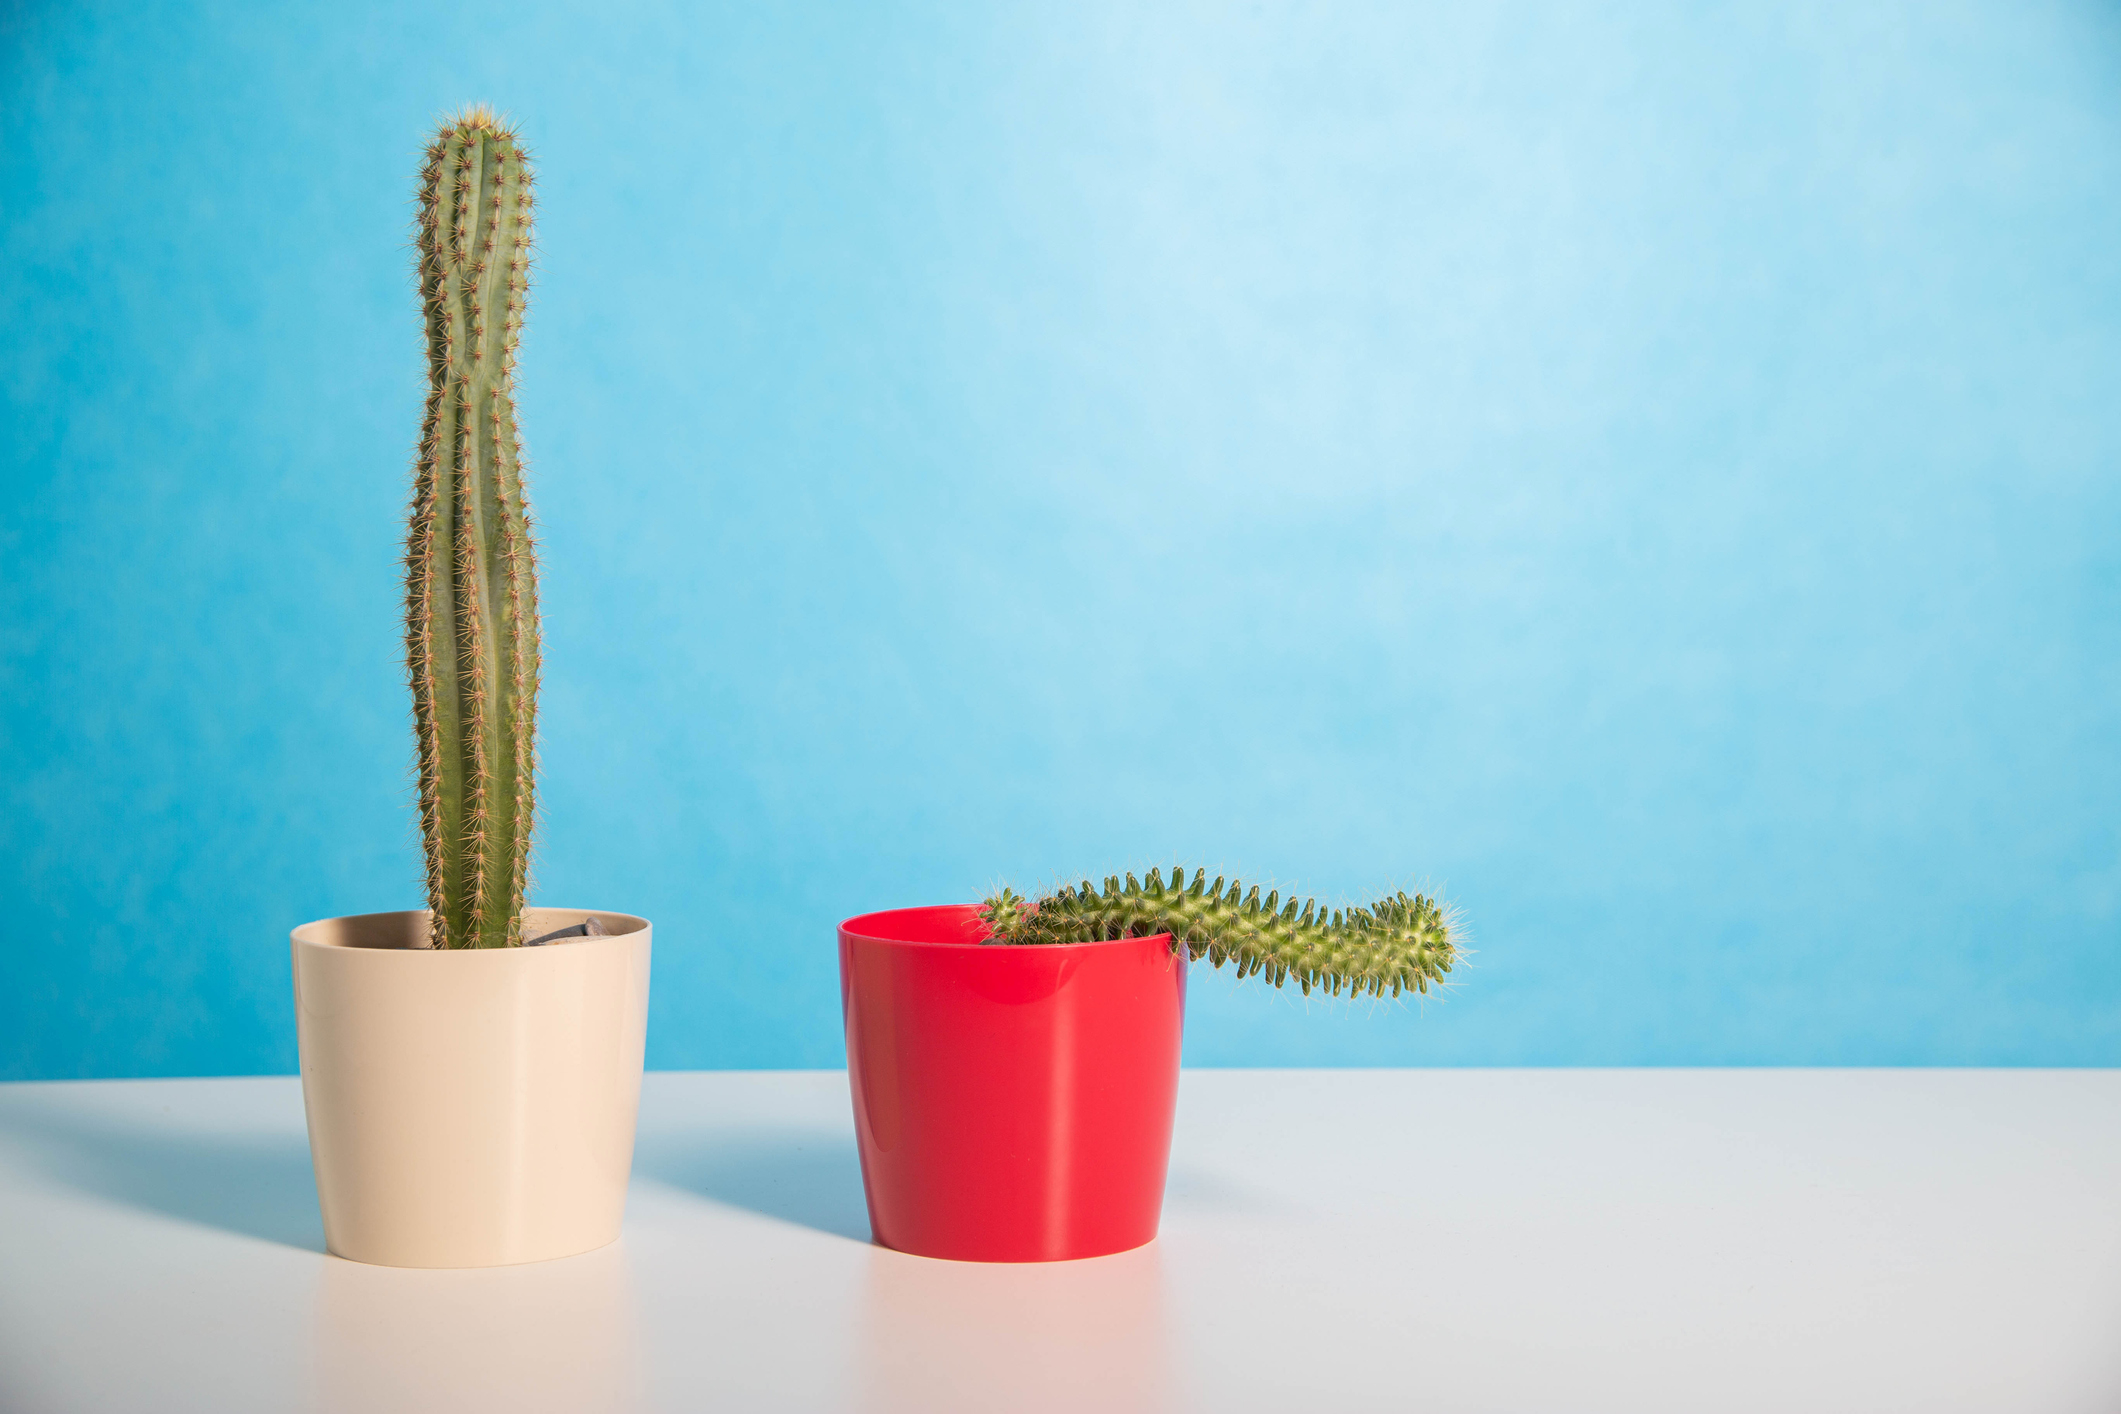 Two potted cacti side by side, one tall and upright, the other leaning over towards the first